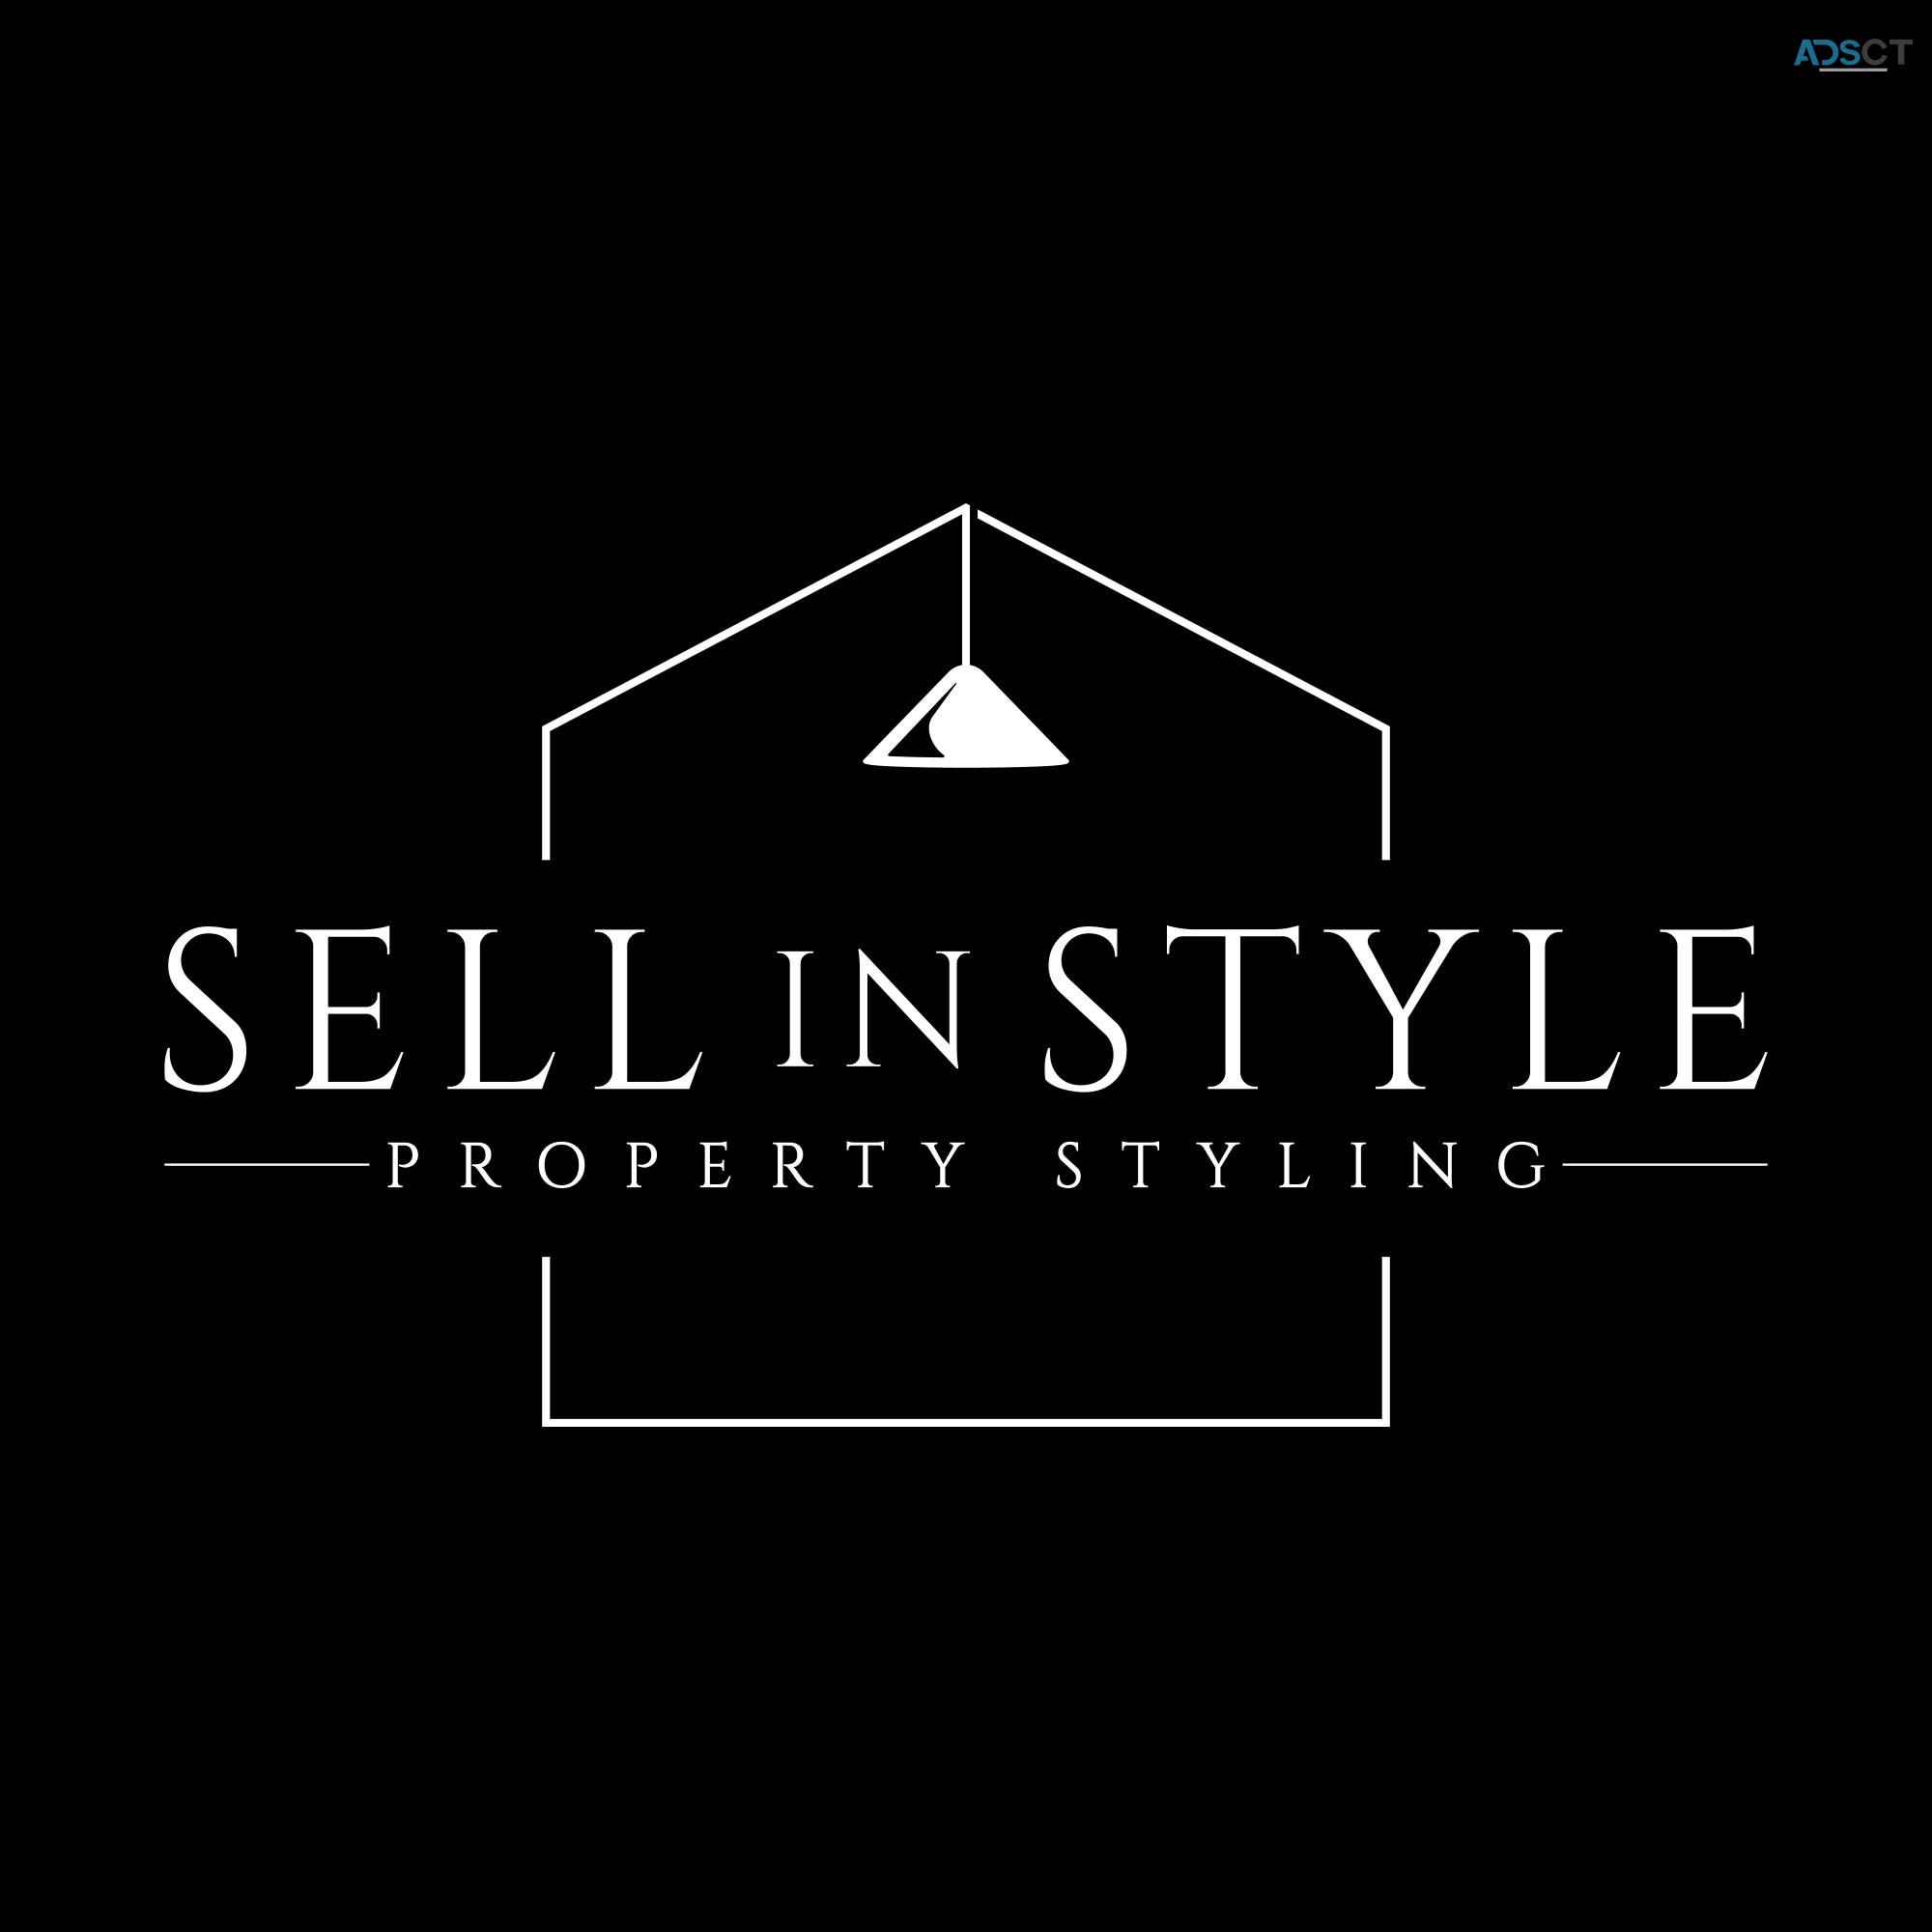 Sell In Style